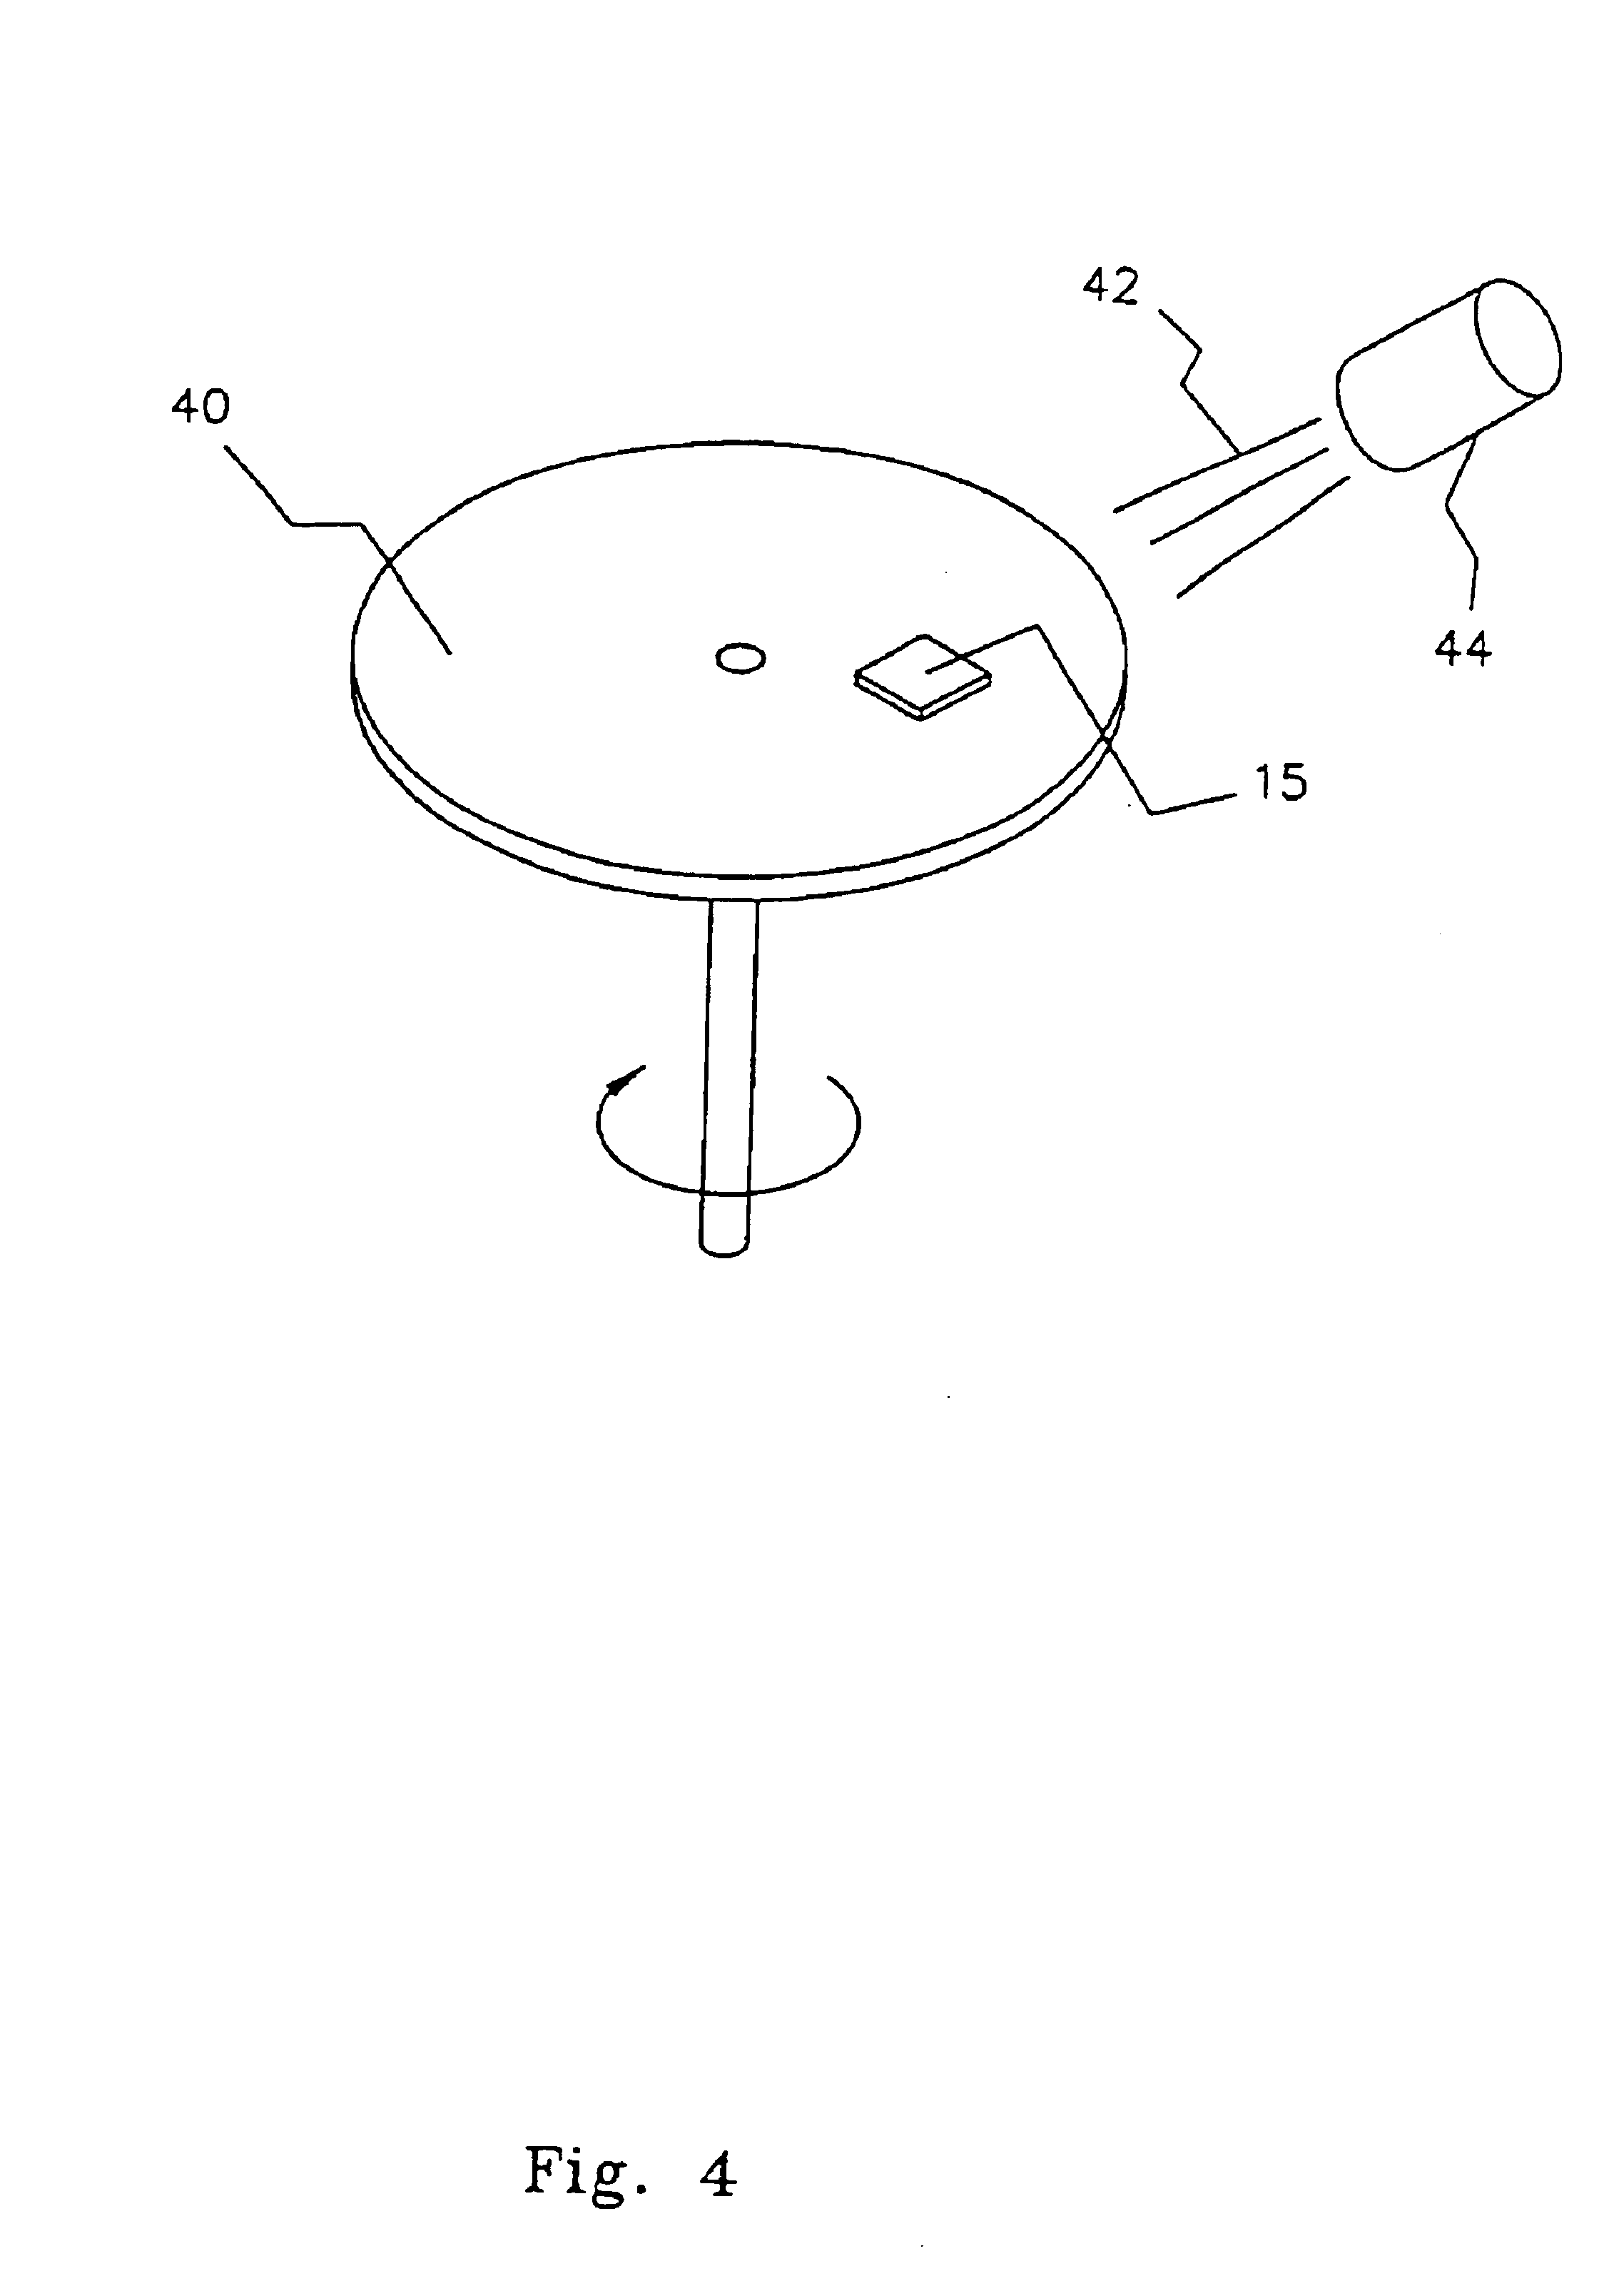 Alumina insulation for coating implantable components and other microminiature devices